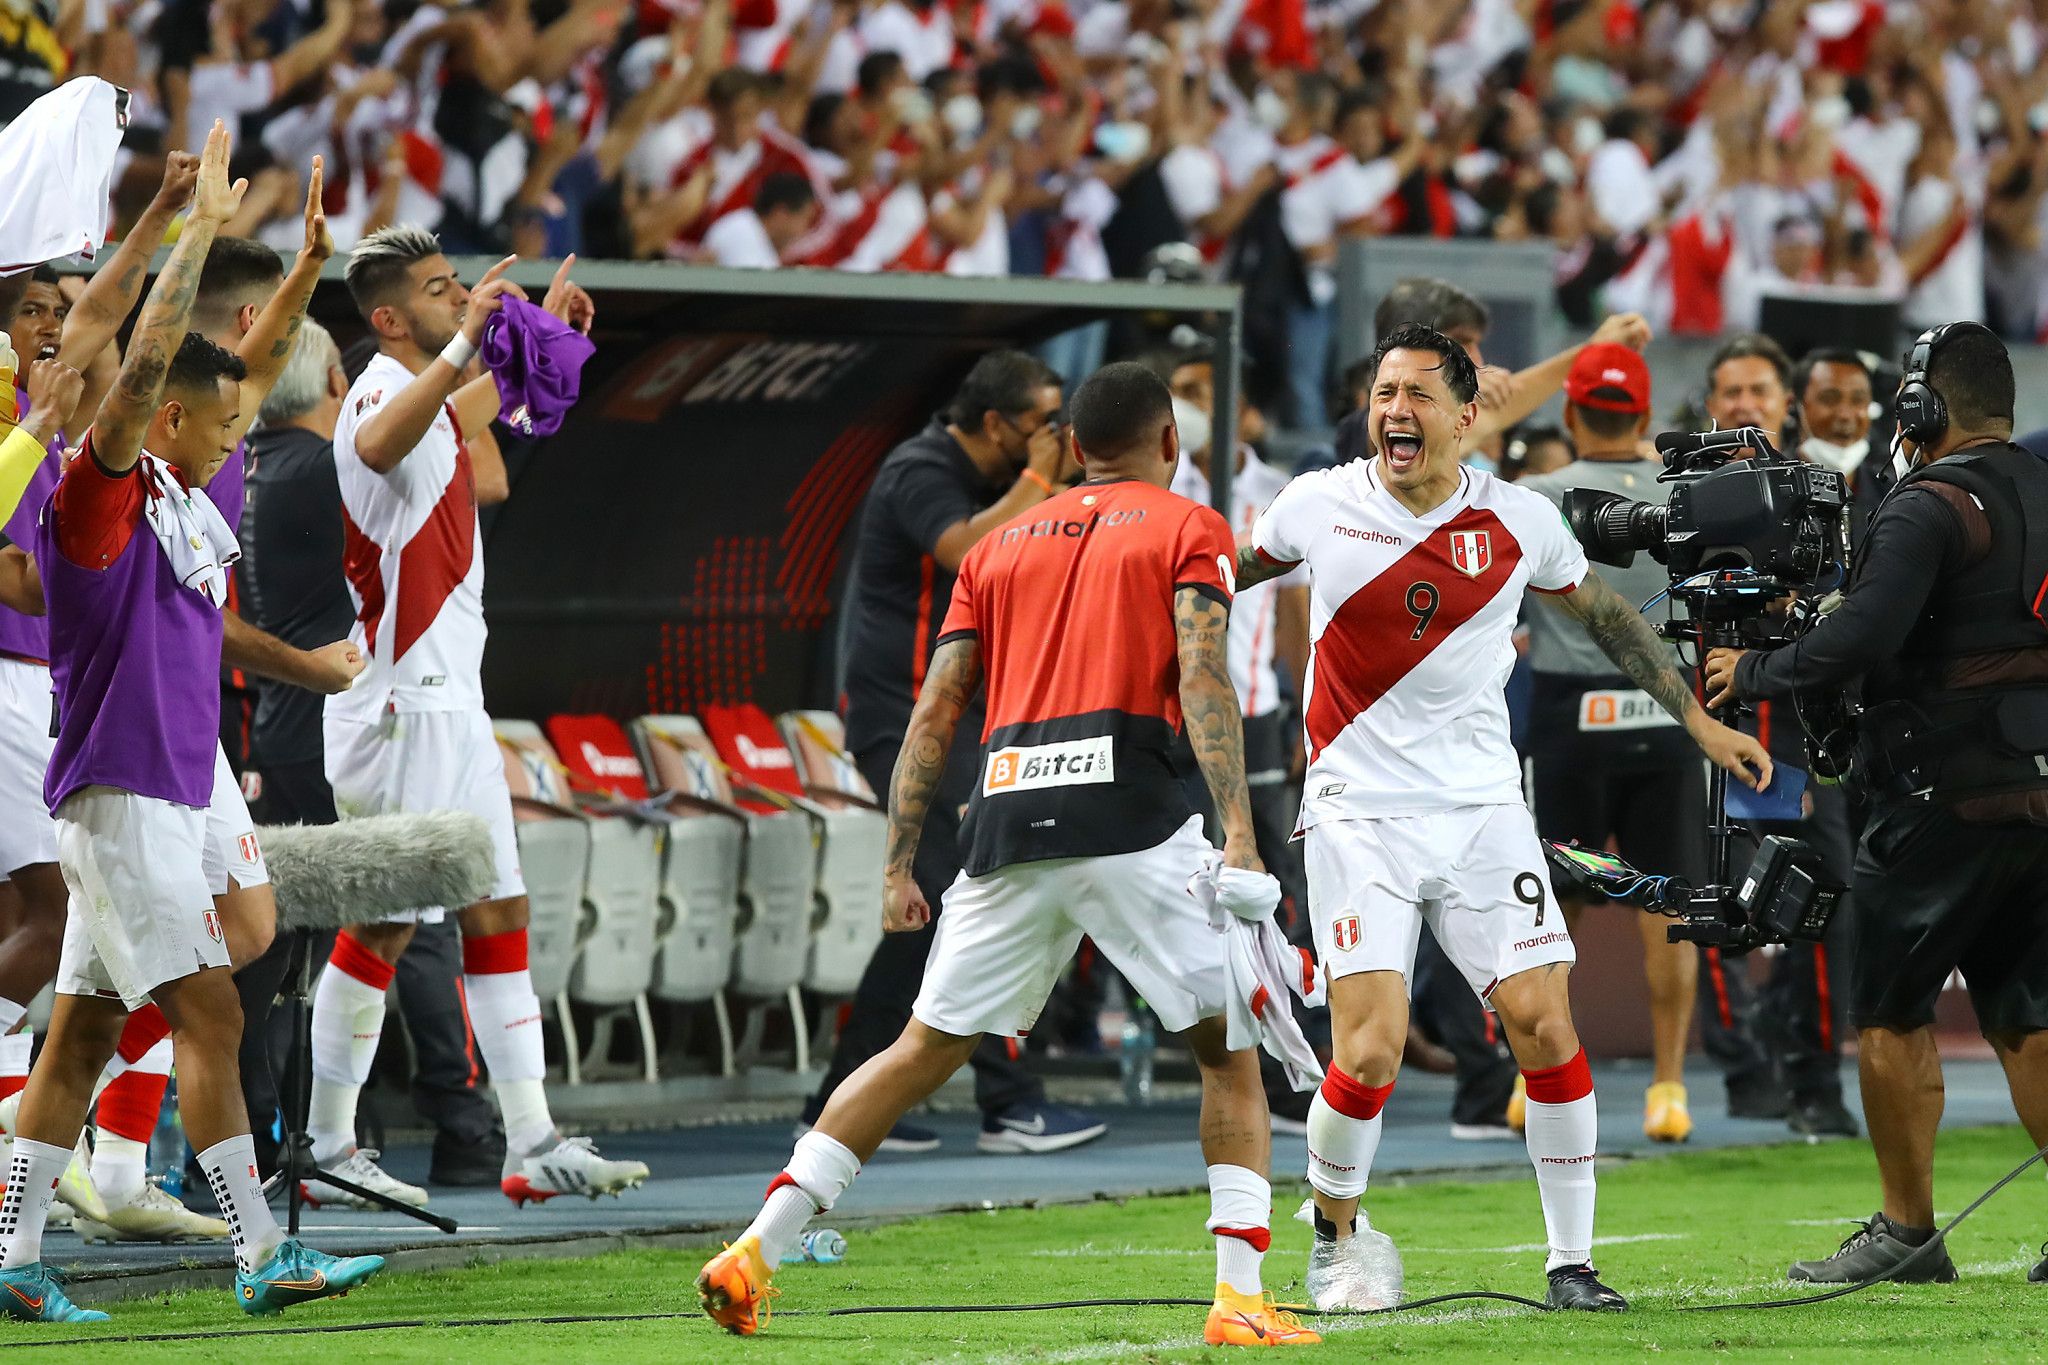 Peru book intercontinental playoff place for Qatar 2022 as South American qualifiers conclude